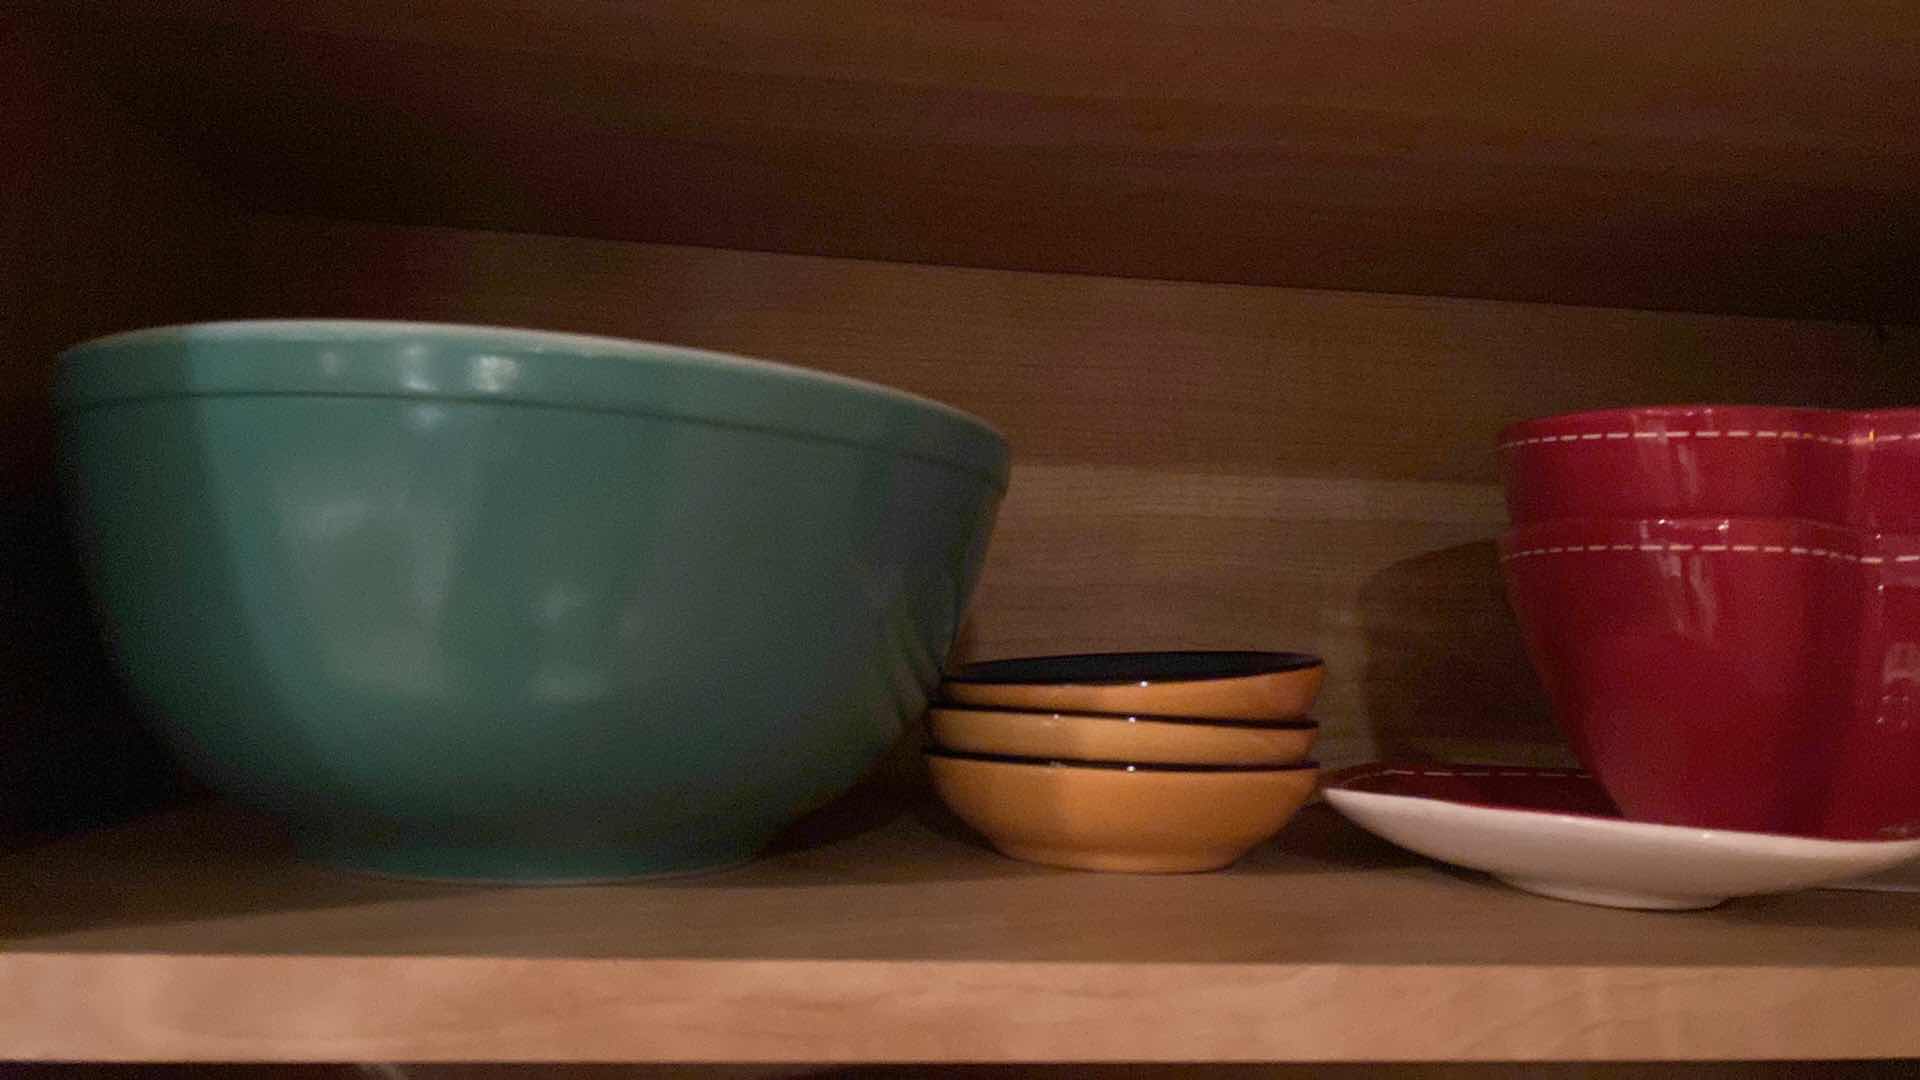 Photo 5 of CONTENTS KITCHEN CABINET CERAMIC BAKEWARE AND WICKER AND METAL SERVE WARE